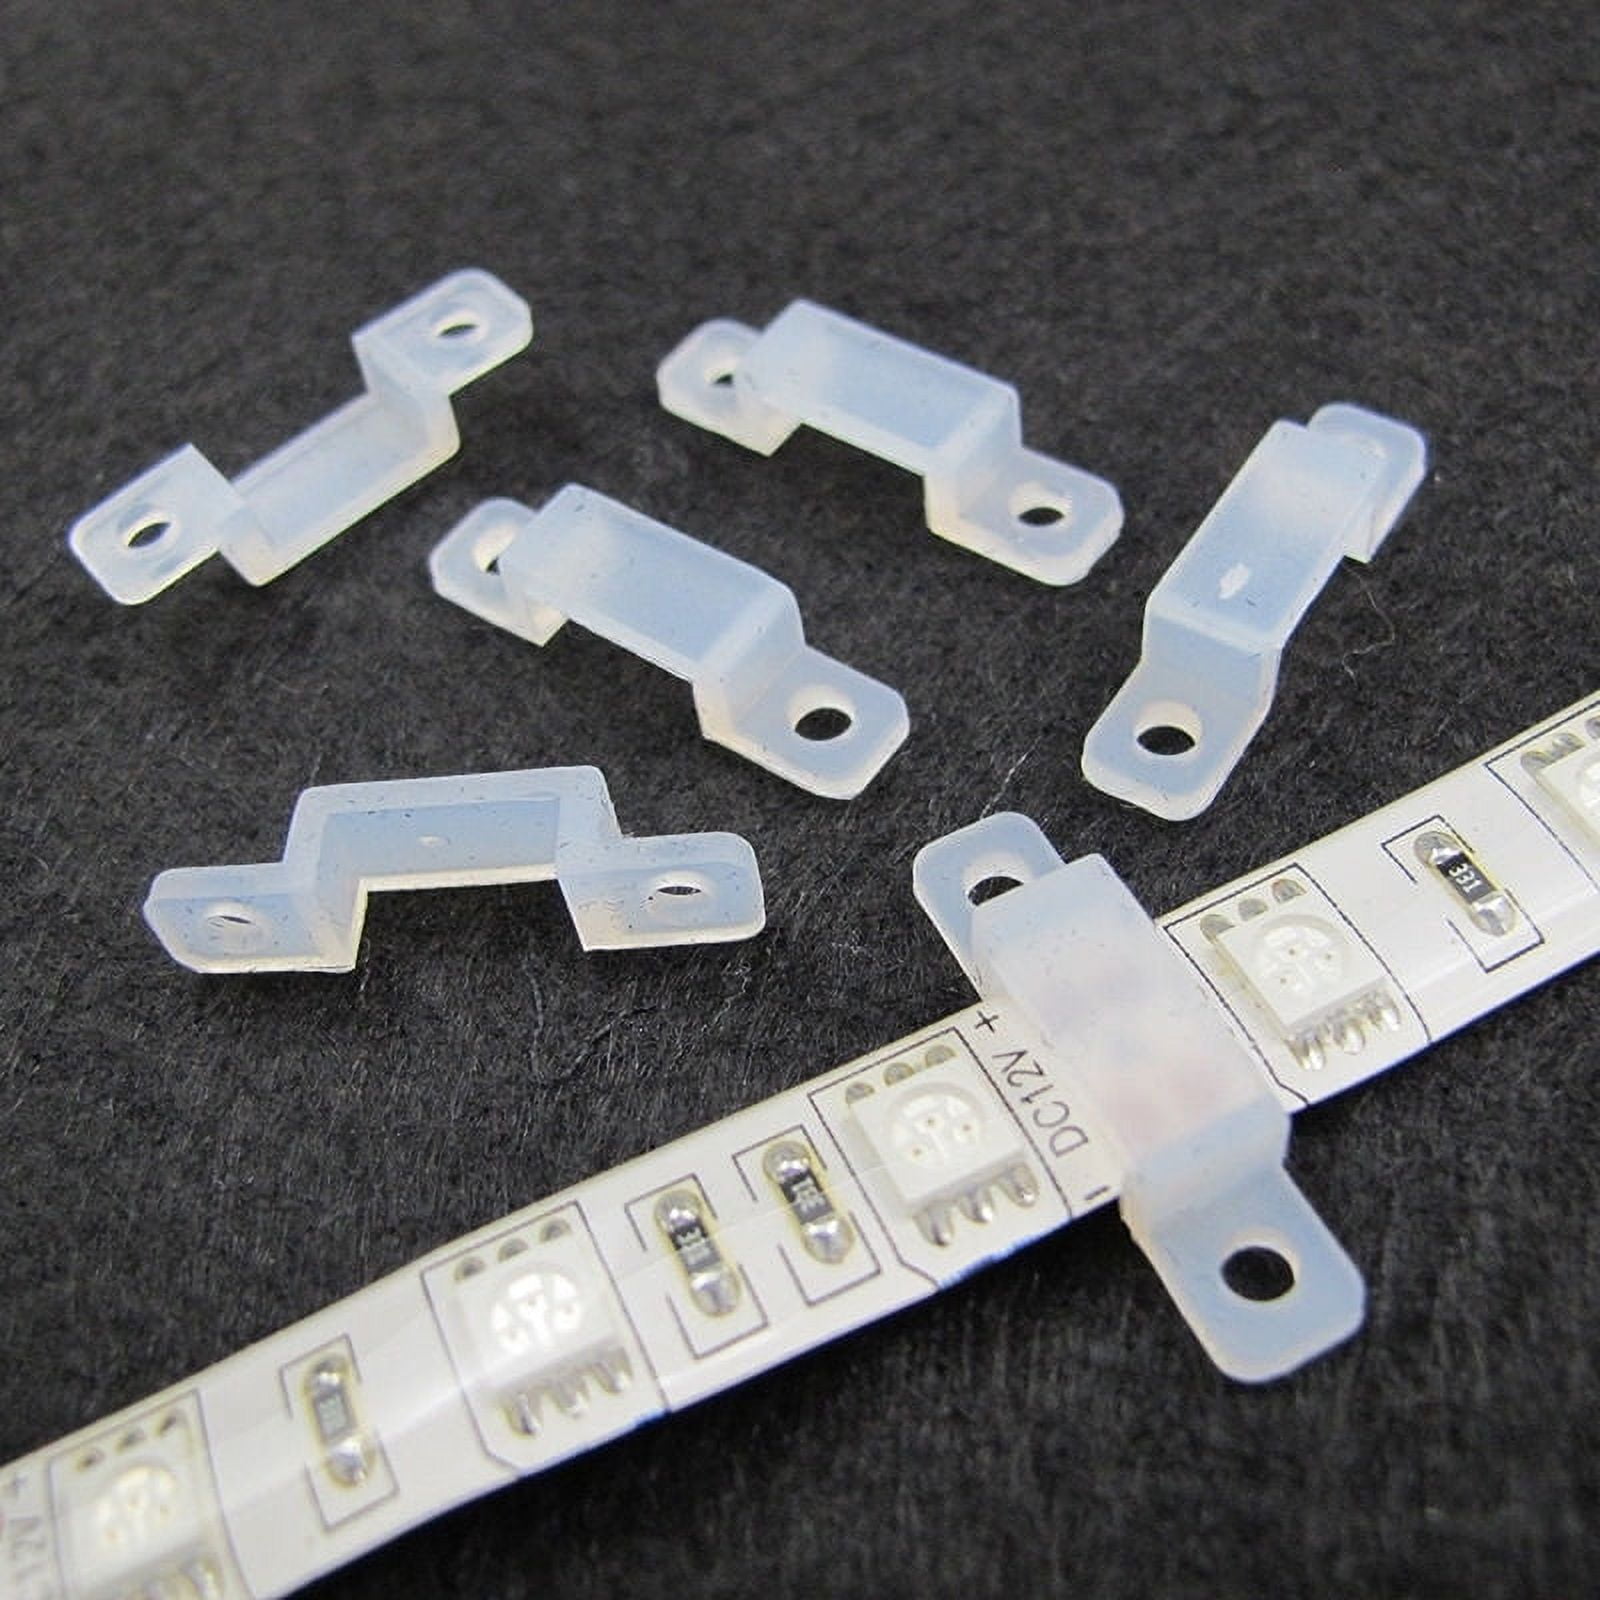 50x LED Strip Mounting Clips Brackets Holders Flexible Silicone 12mm